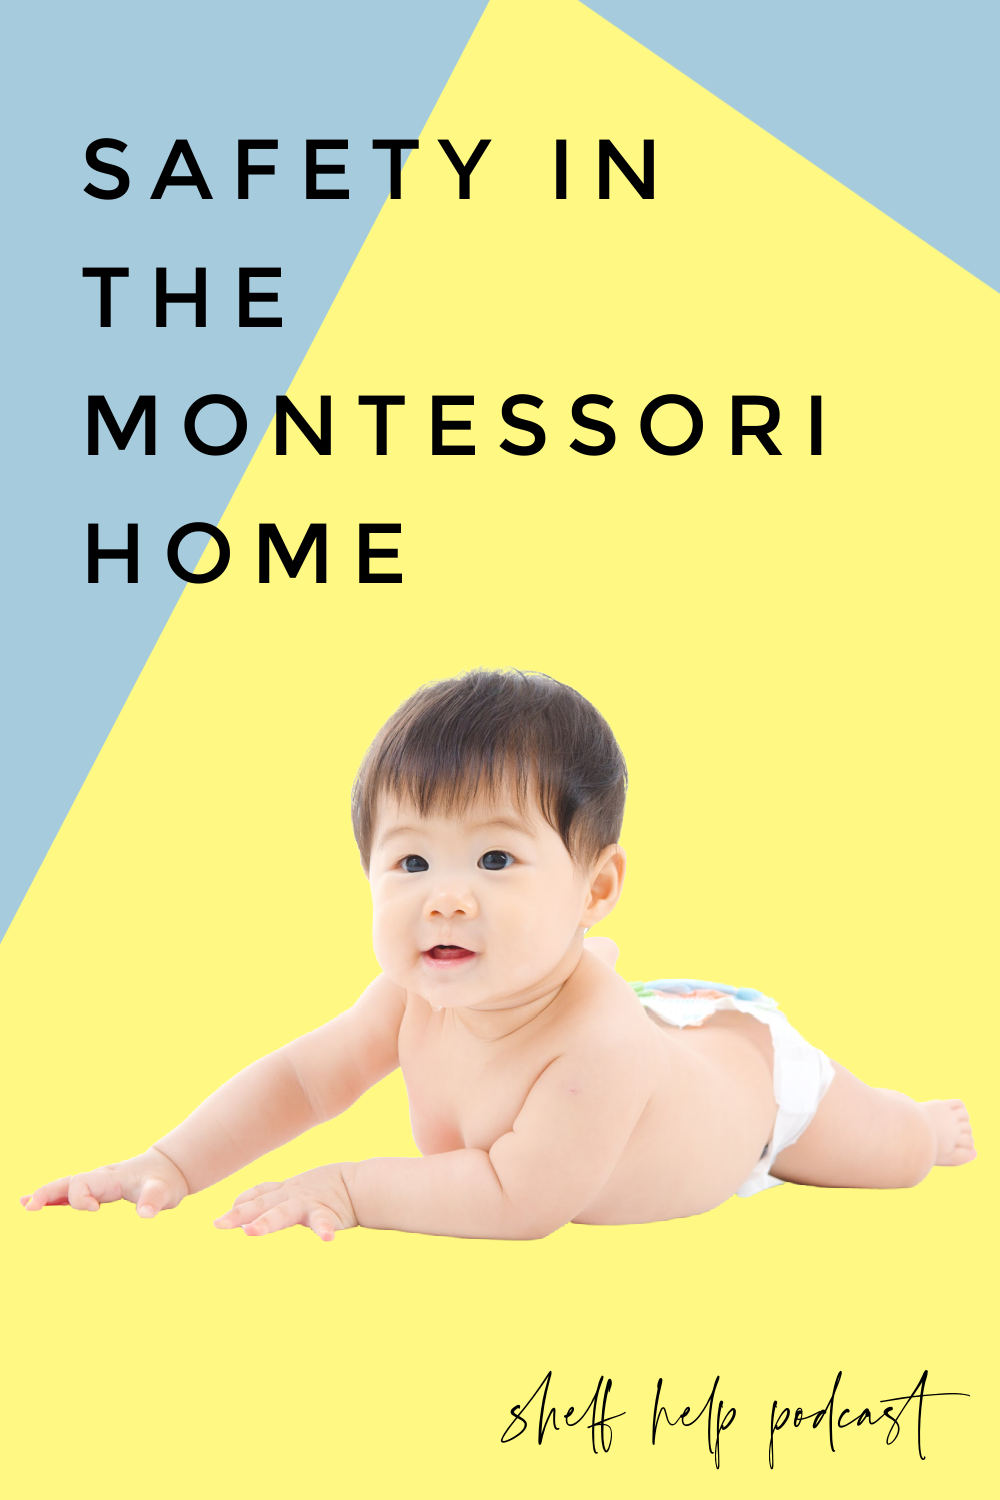 In this Montessori parenting podcast, we talk safety and Montessori babies. We explore balance safety and freedom of movement for young children.